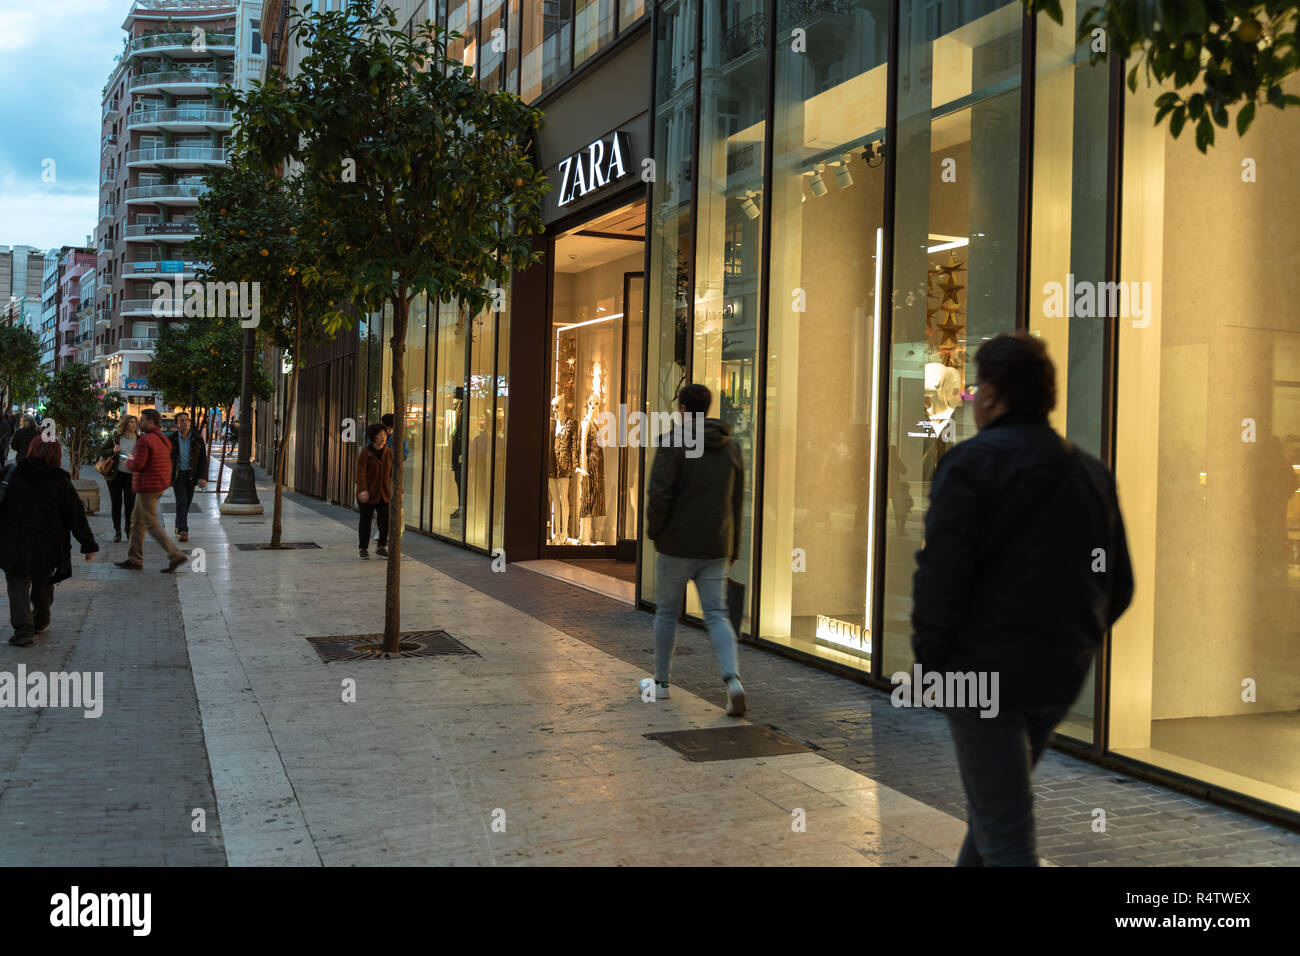 Valencia,Spain - November 25, 2018: Zara store in Valencia. Zara is a  Spanish clothing and accessories retailer Zara store. People walking in and  out Stock Photo - Alamy